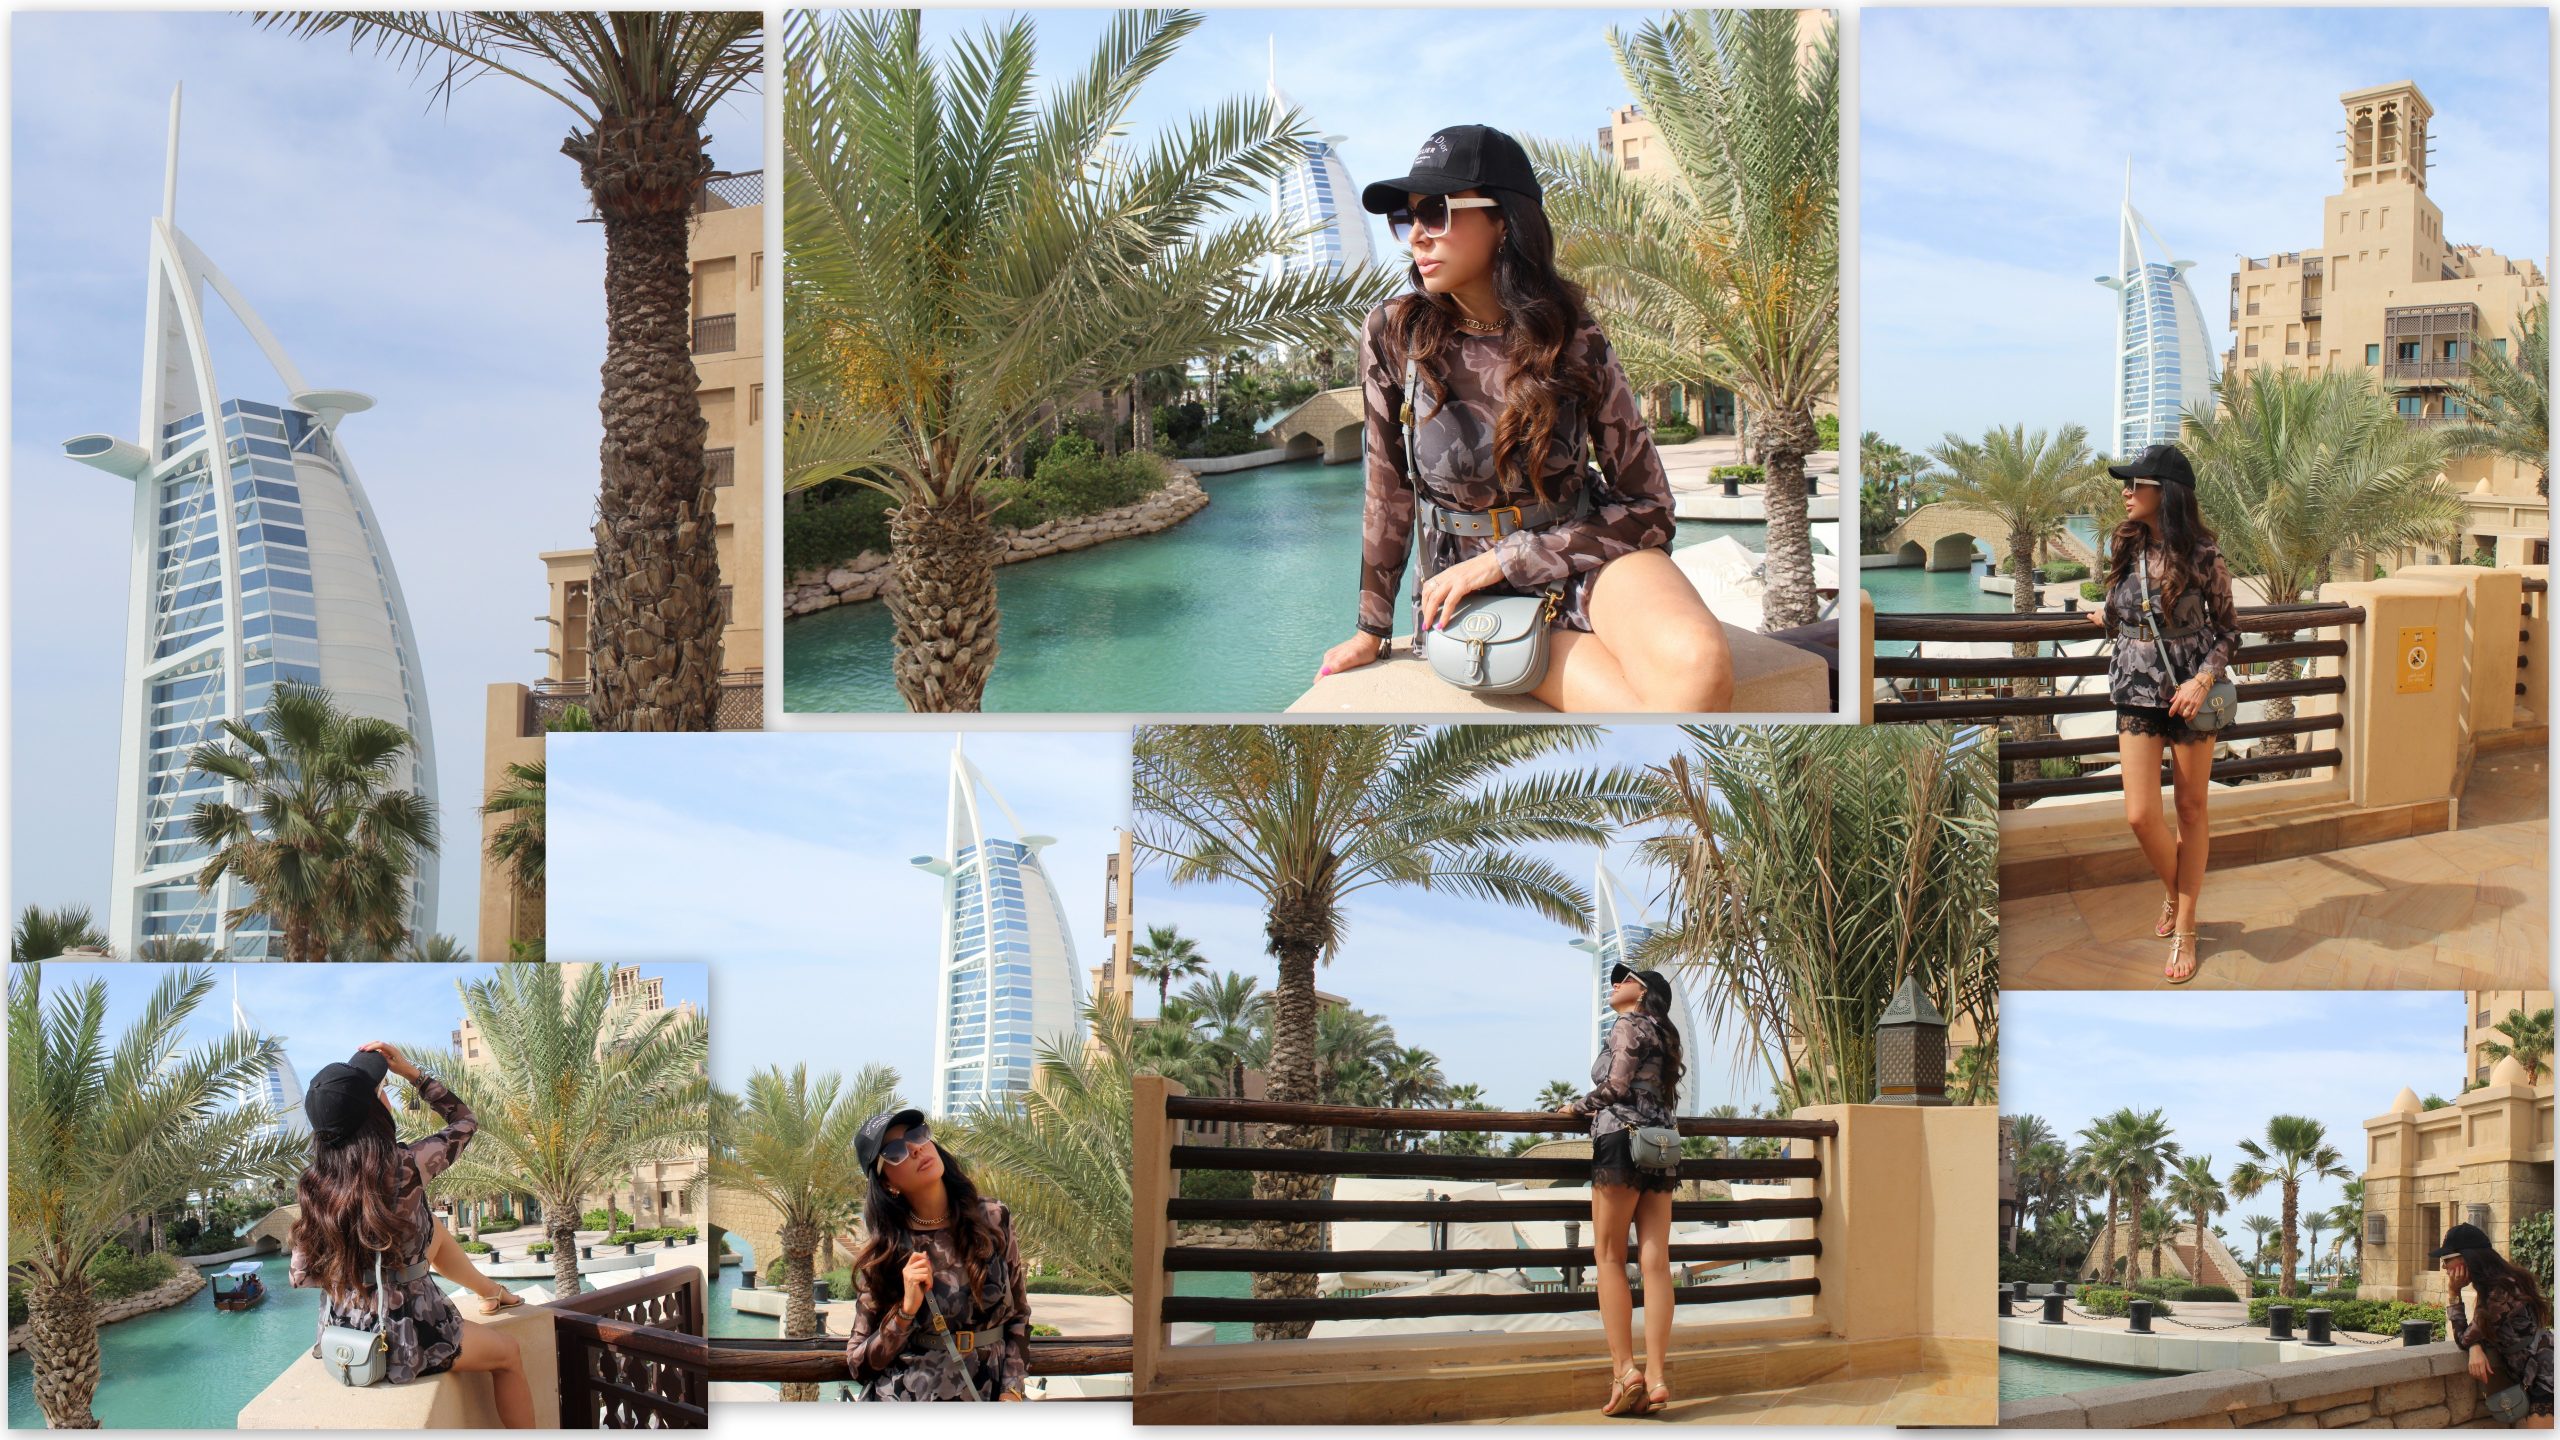 Arabic Style at MADINAT JUMEIRAH MERCI blouse and shorts  DIOR cap, sunglasses, jewelry, belt and bag CHANEL sandals Paola Lauretano Lifestyle Blogger